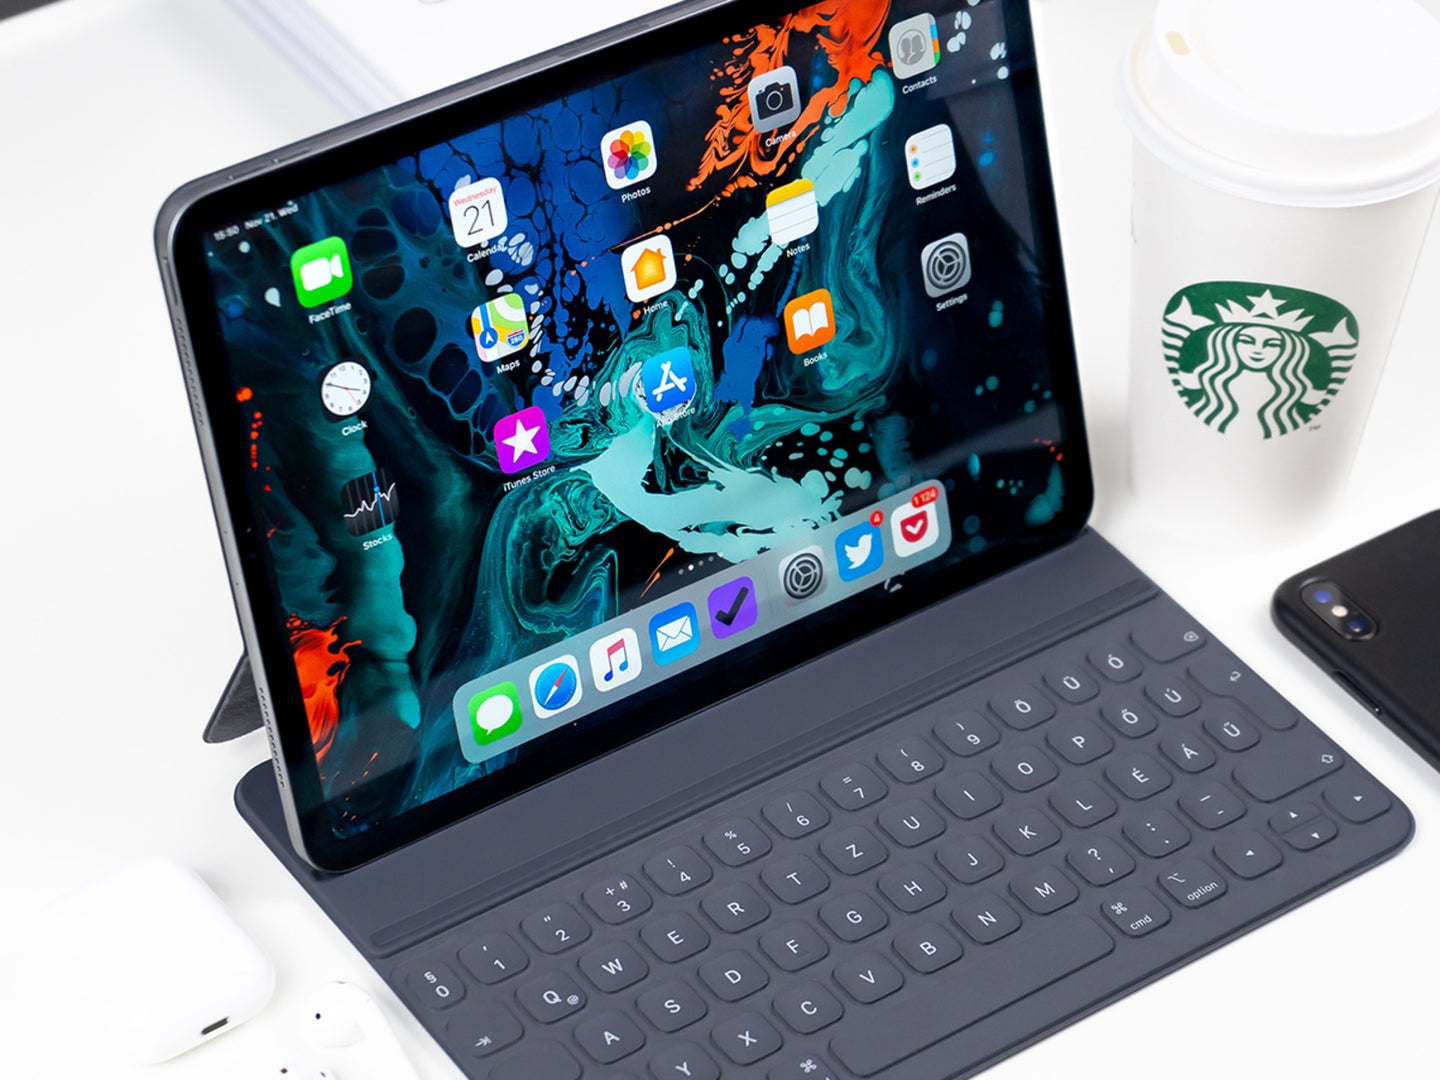 An iPad with a detachable keyboard add-on, on a white table next to a Starbucks cup and an iPhone.